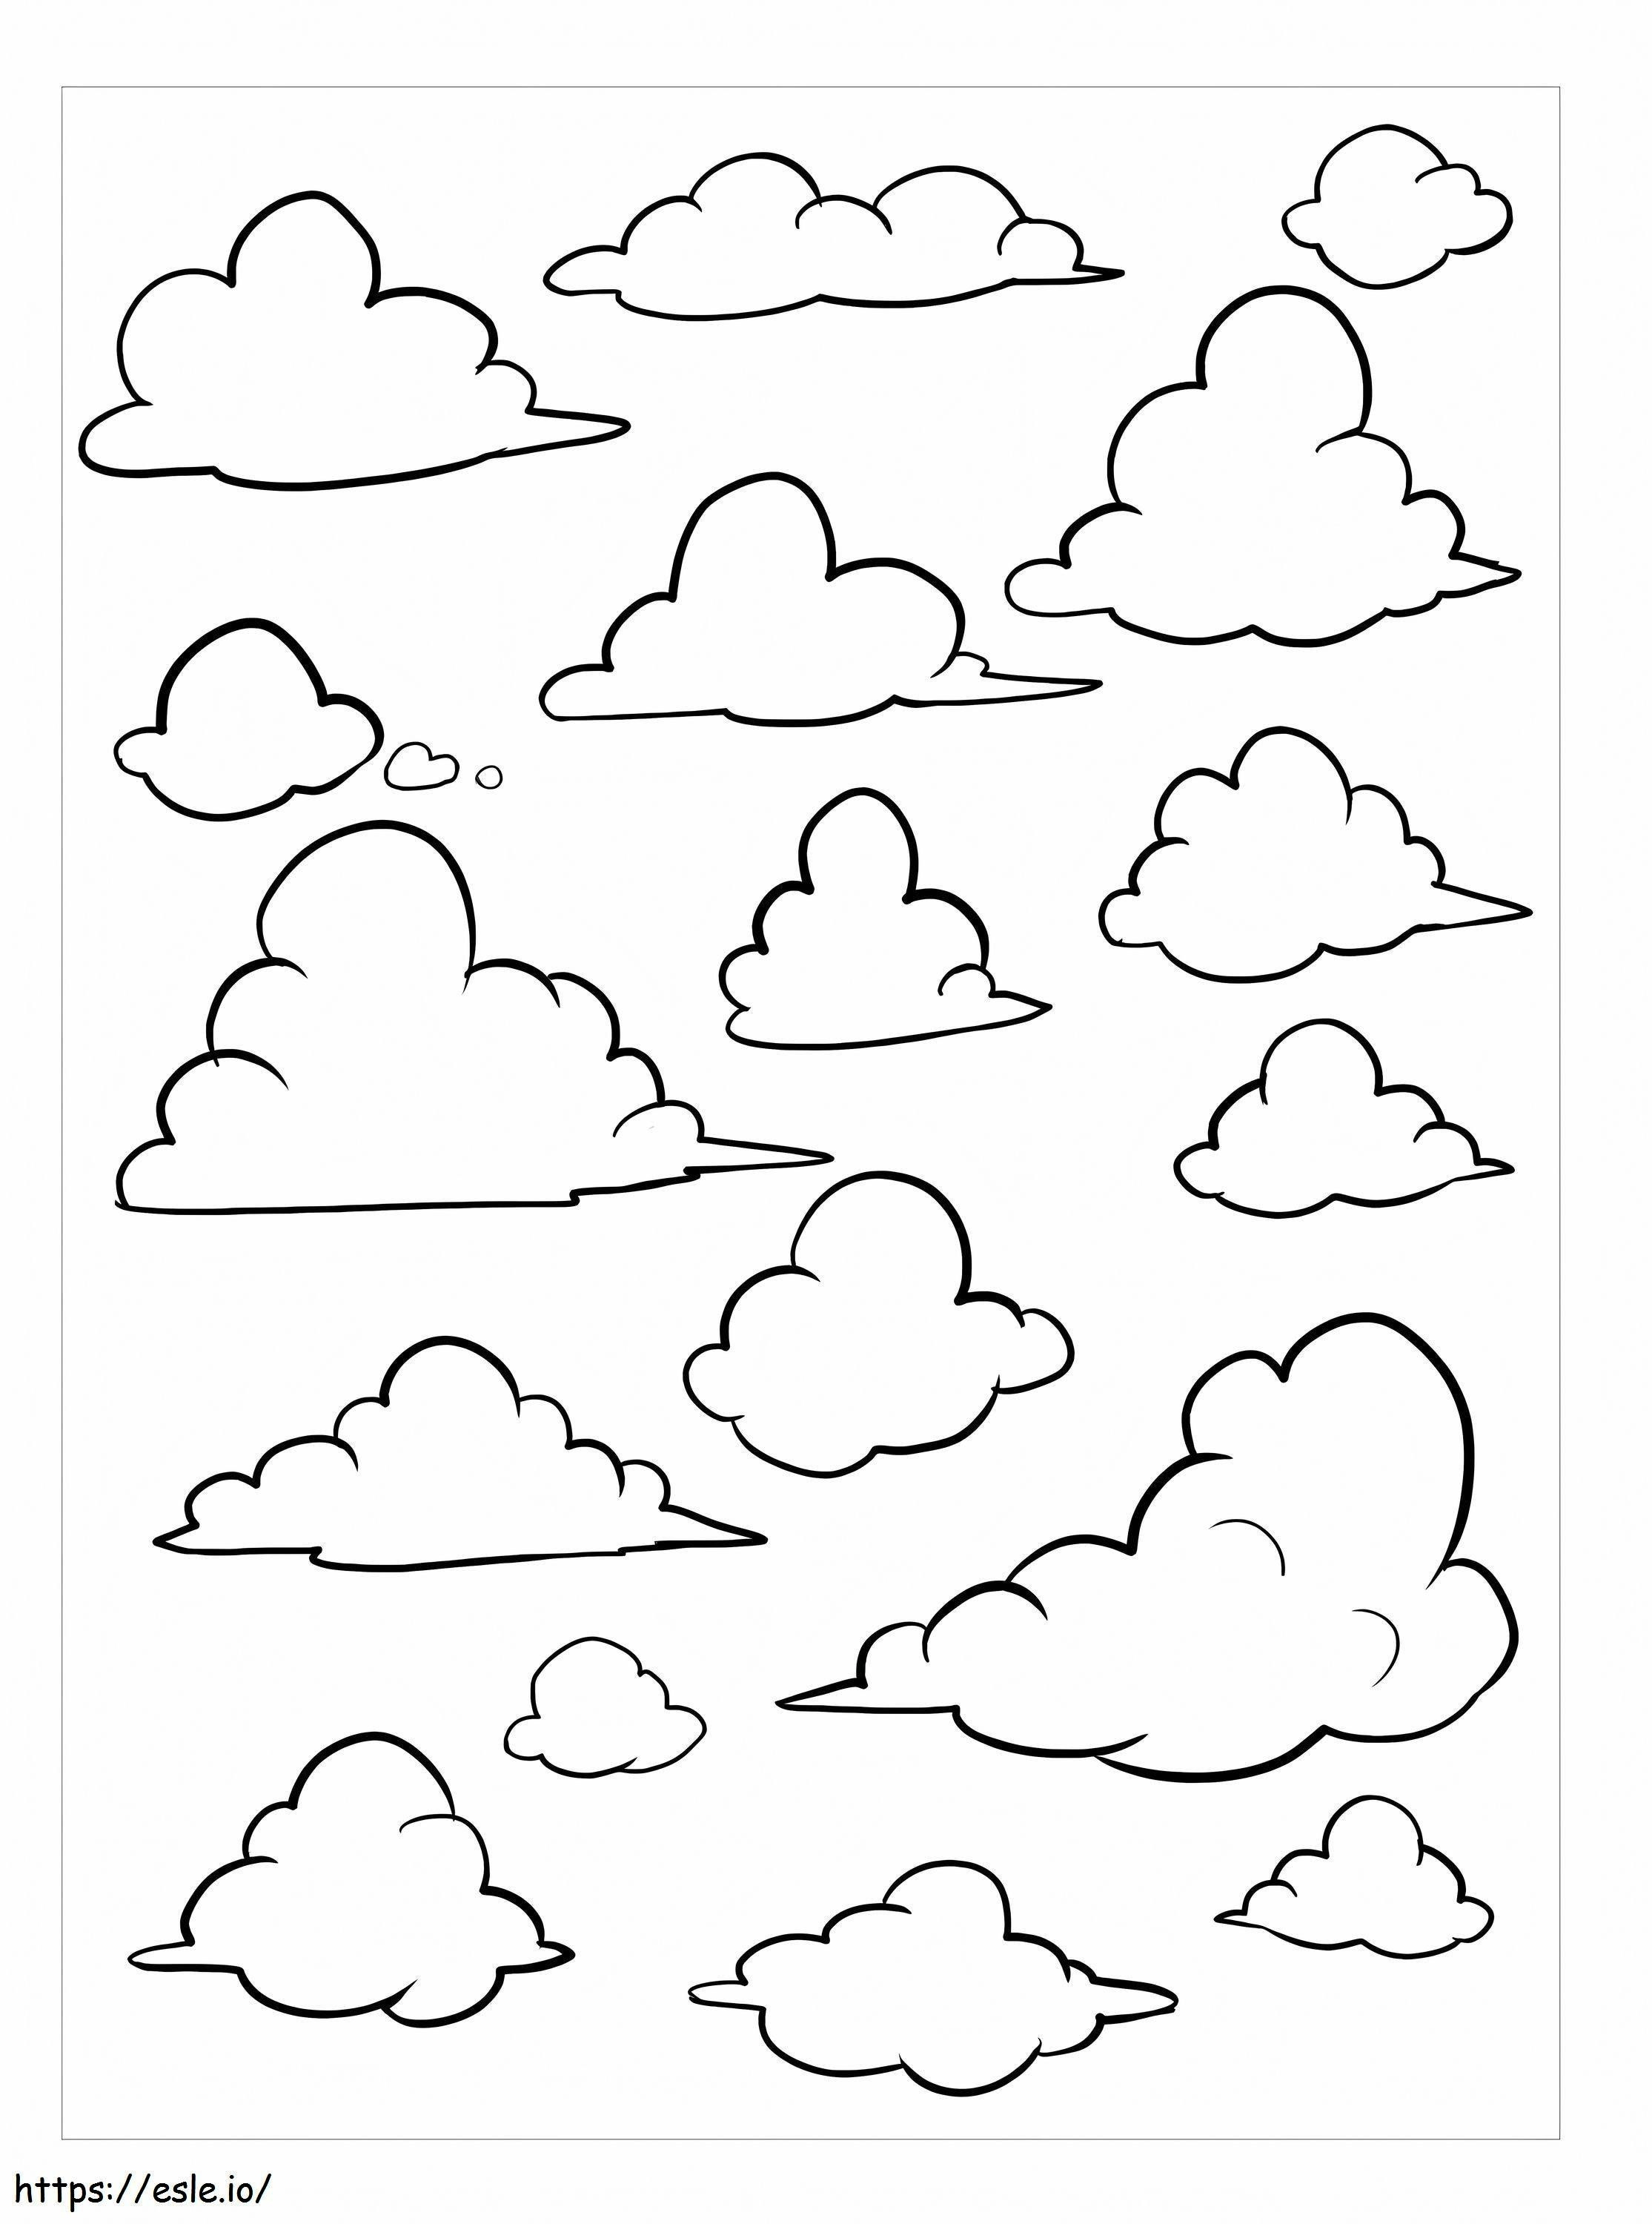 Basic Types Of Clouds coloring page